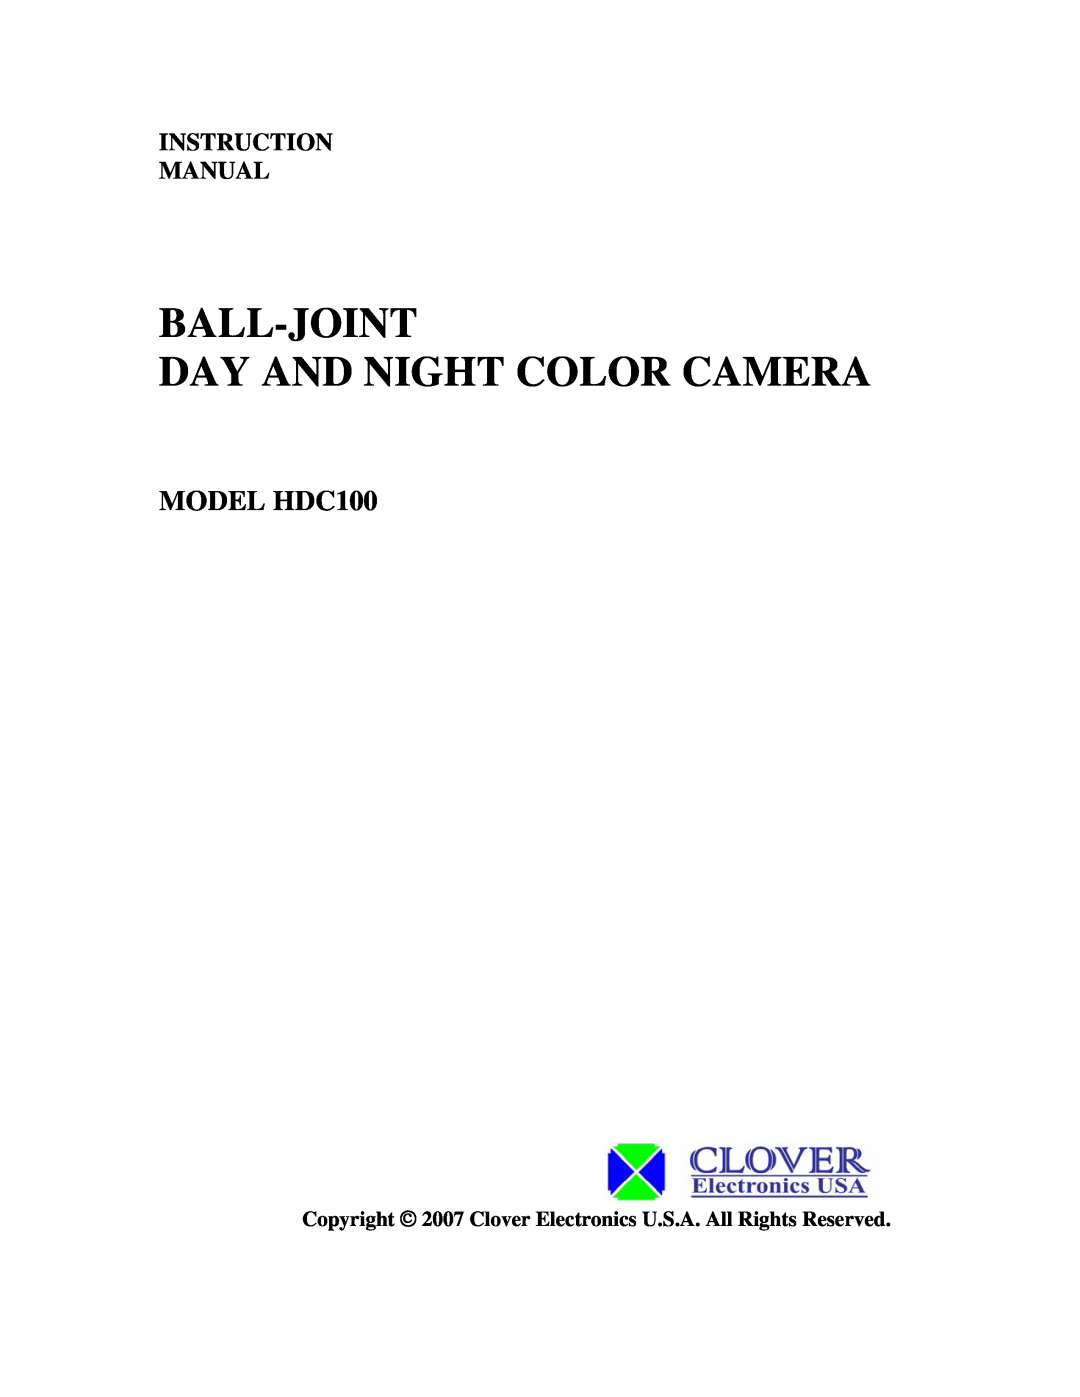 Clover Electronics instruction manual MODEL HDC100, Instruction Manual, Ball-Joint Day And Night Color Camera 